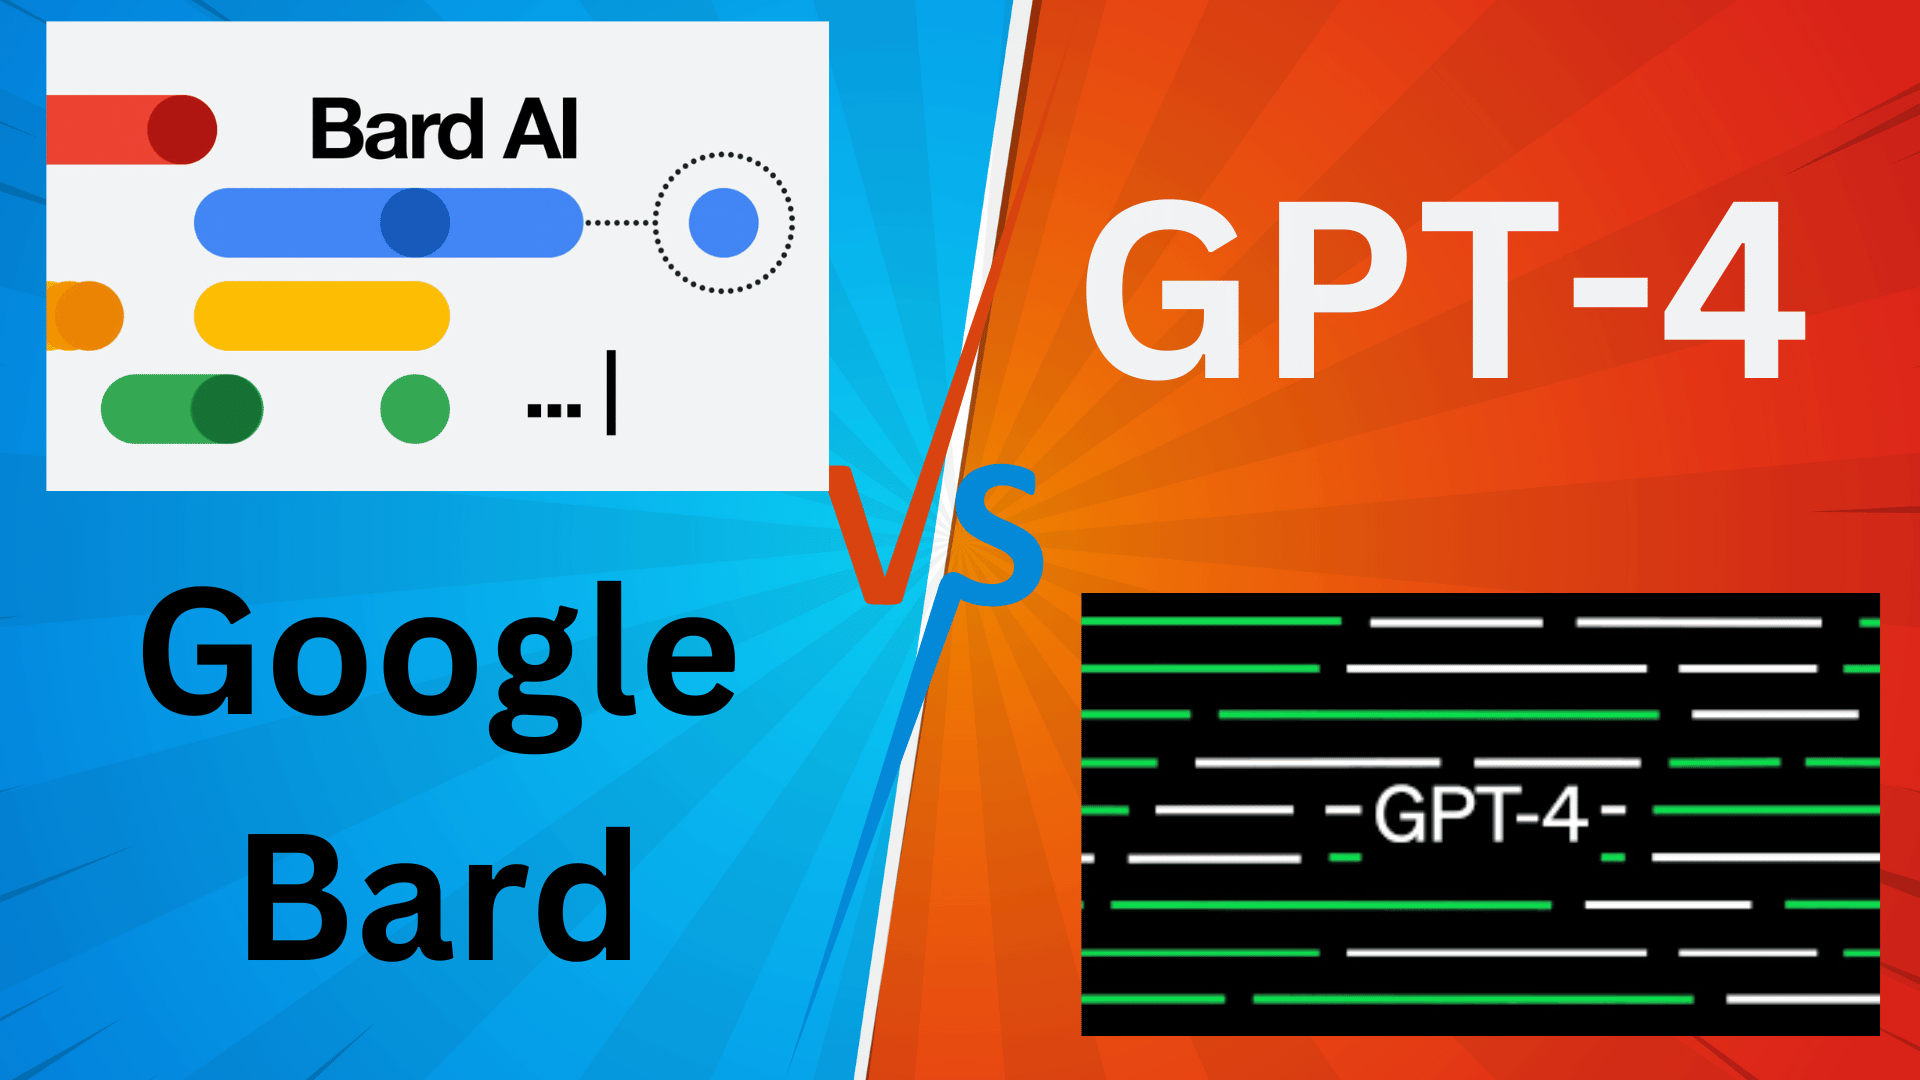 Google Bard AI vs GPT-4: How to Get Access?